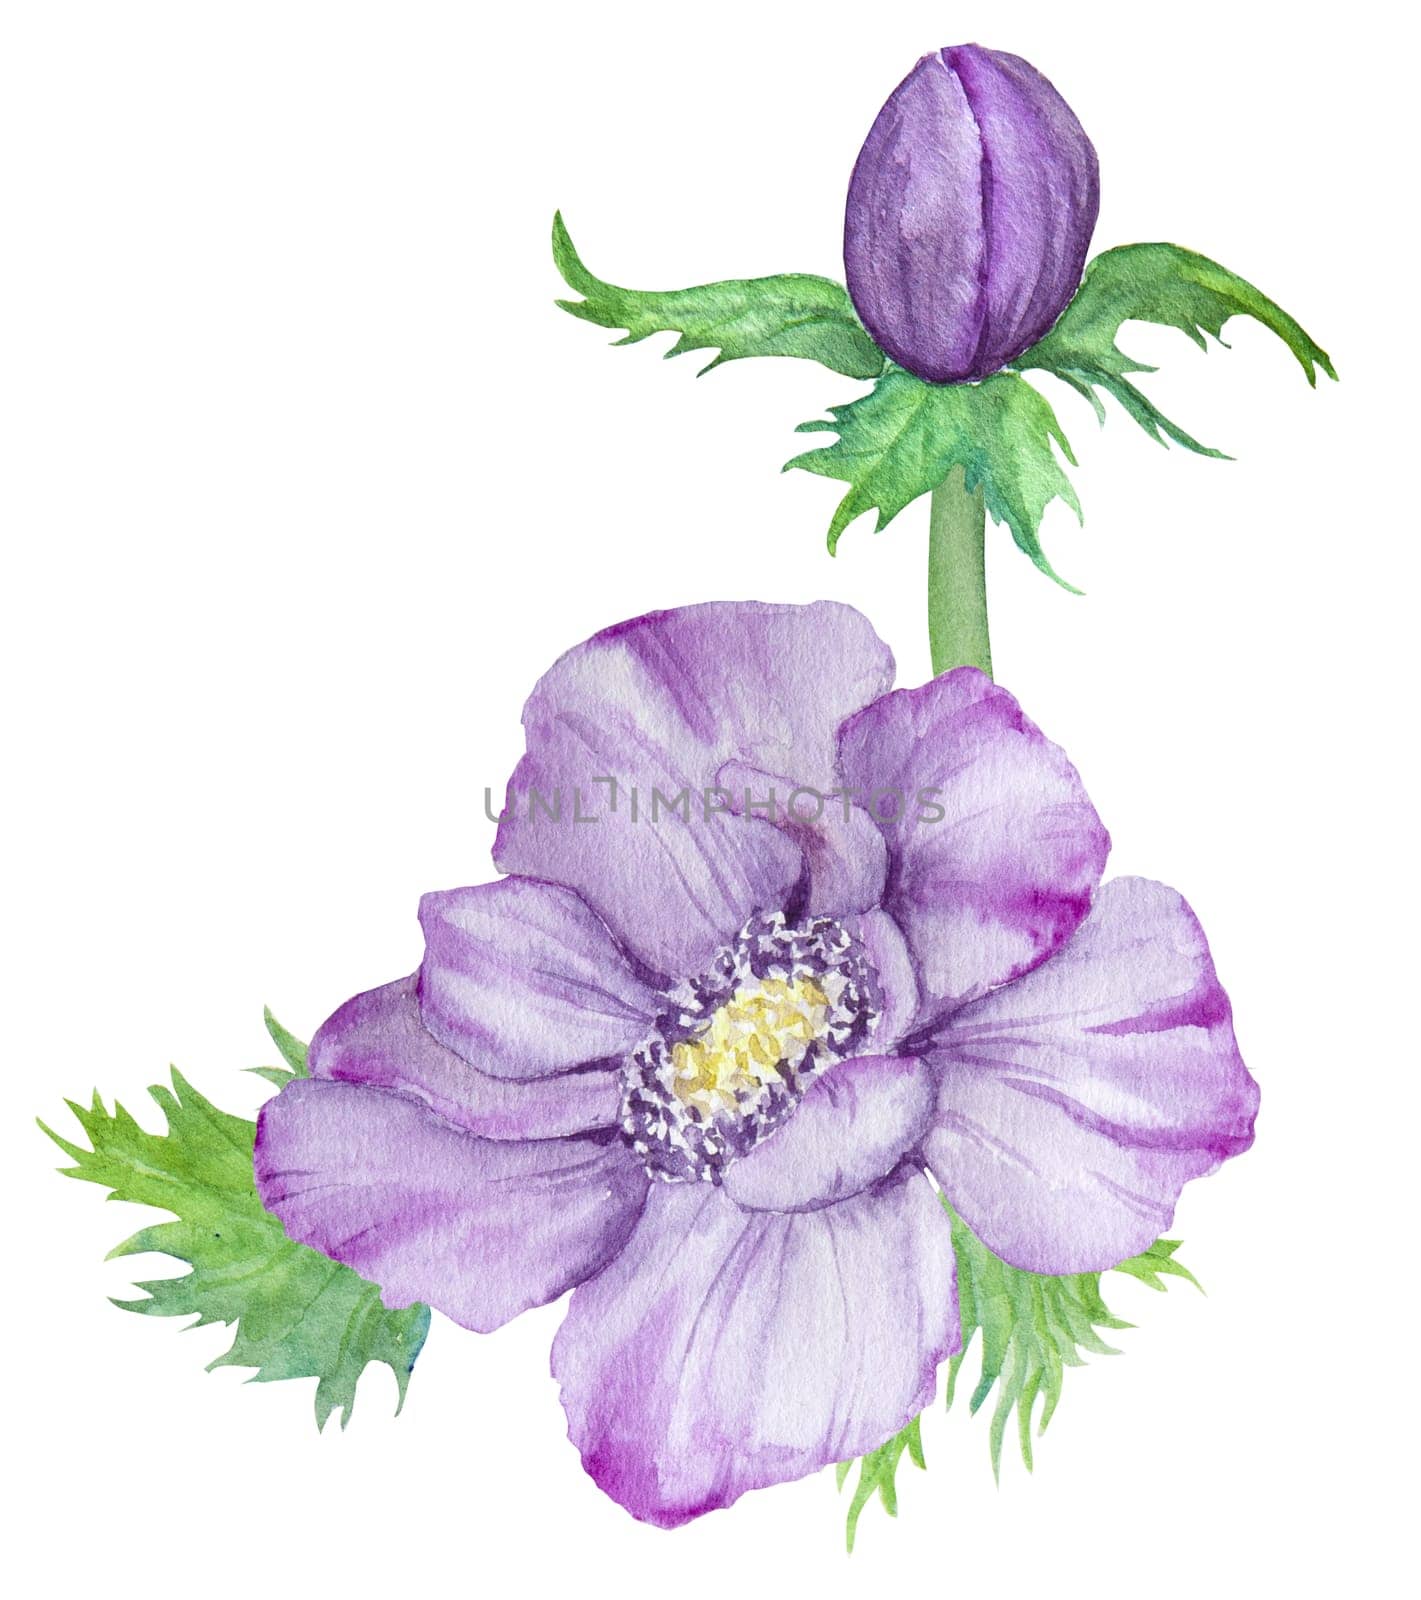 Watercolor hand drawn purple anemones with green leaves isolated on white background. Great for greeting cards, wedding invitations, menu, labels, textile and others.